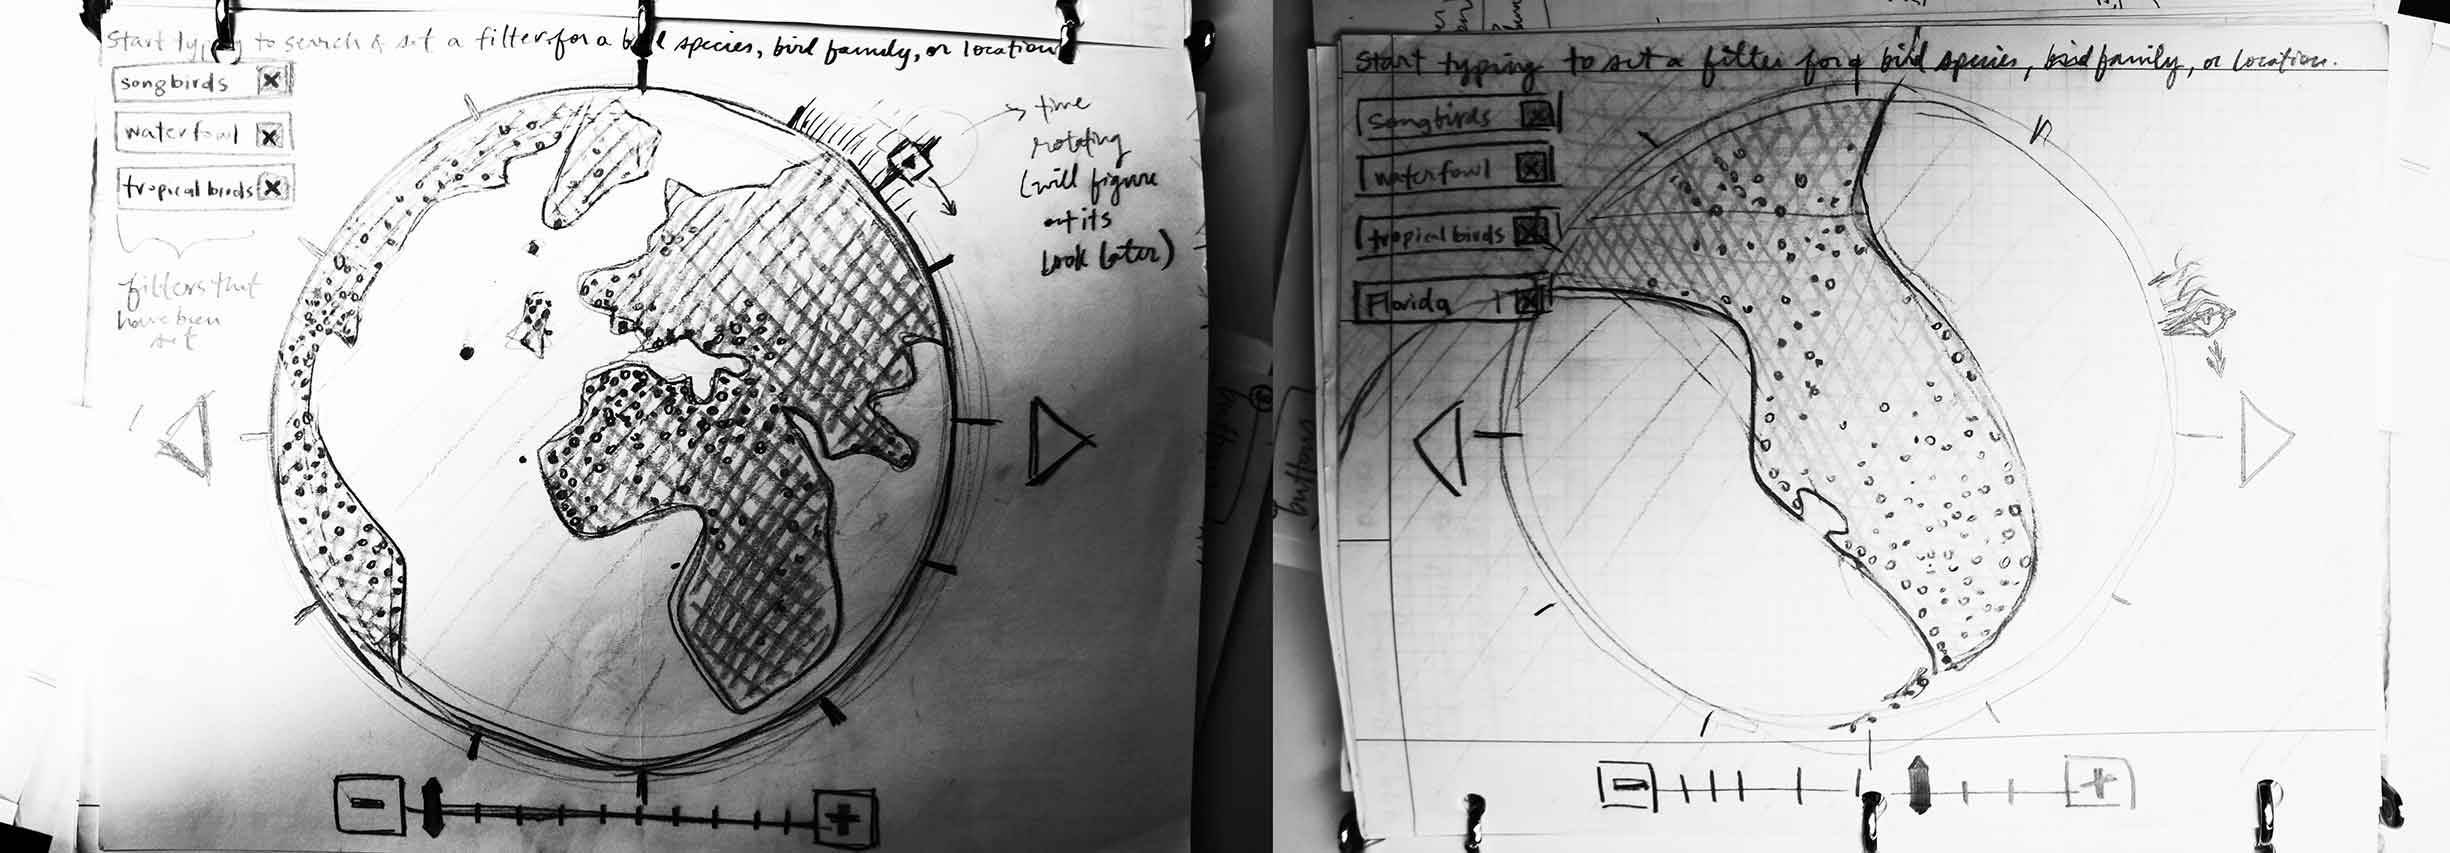 Two side-by-side sketches with notes, both showing a large circle in the center. In the first, the circle frames a globe, in the second it frames the Florida peninsula.